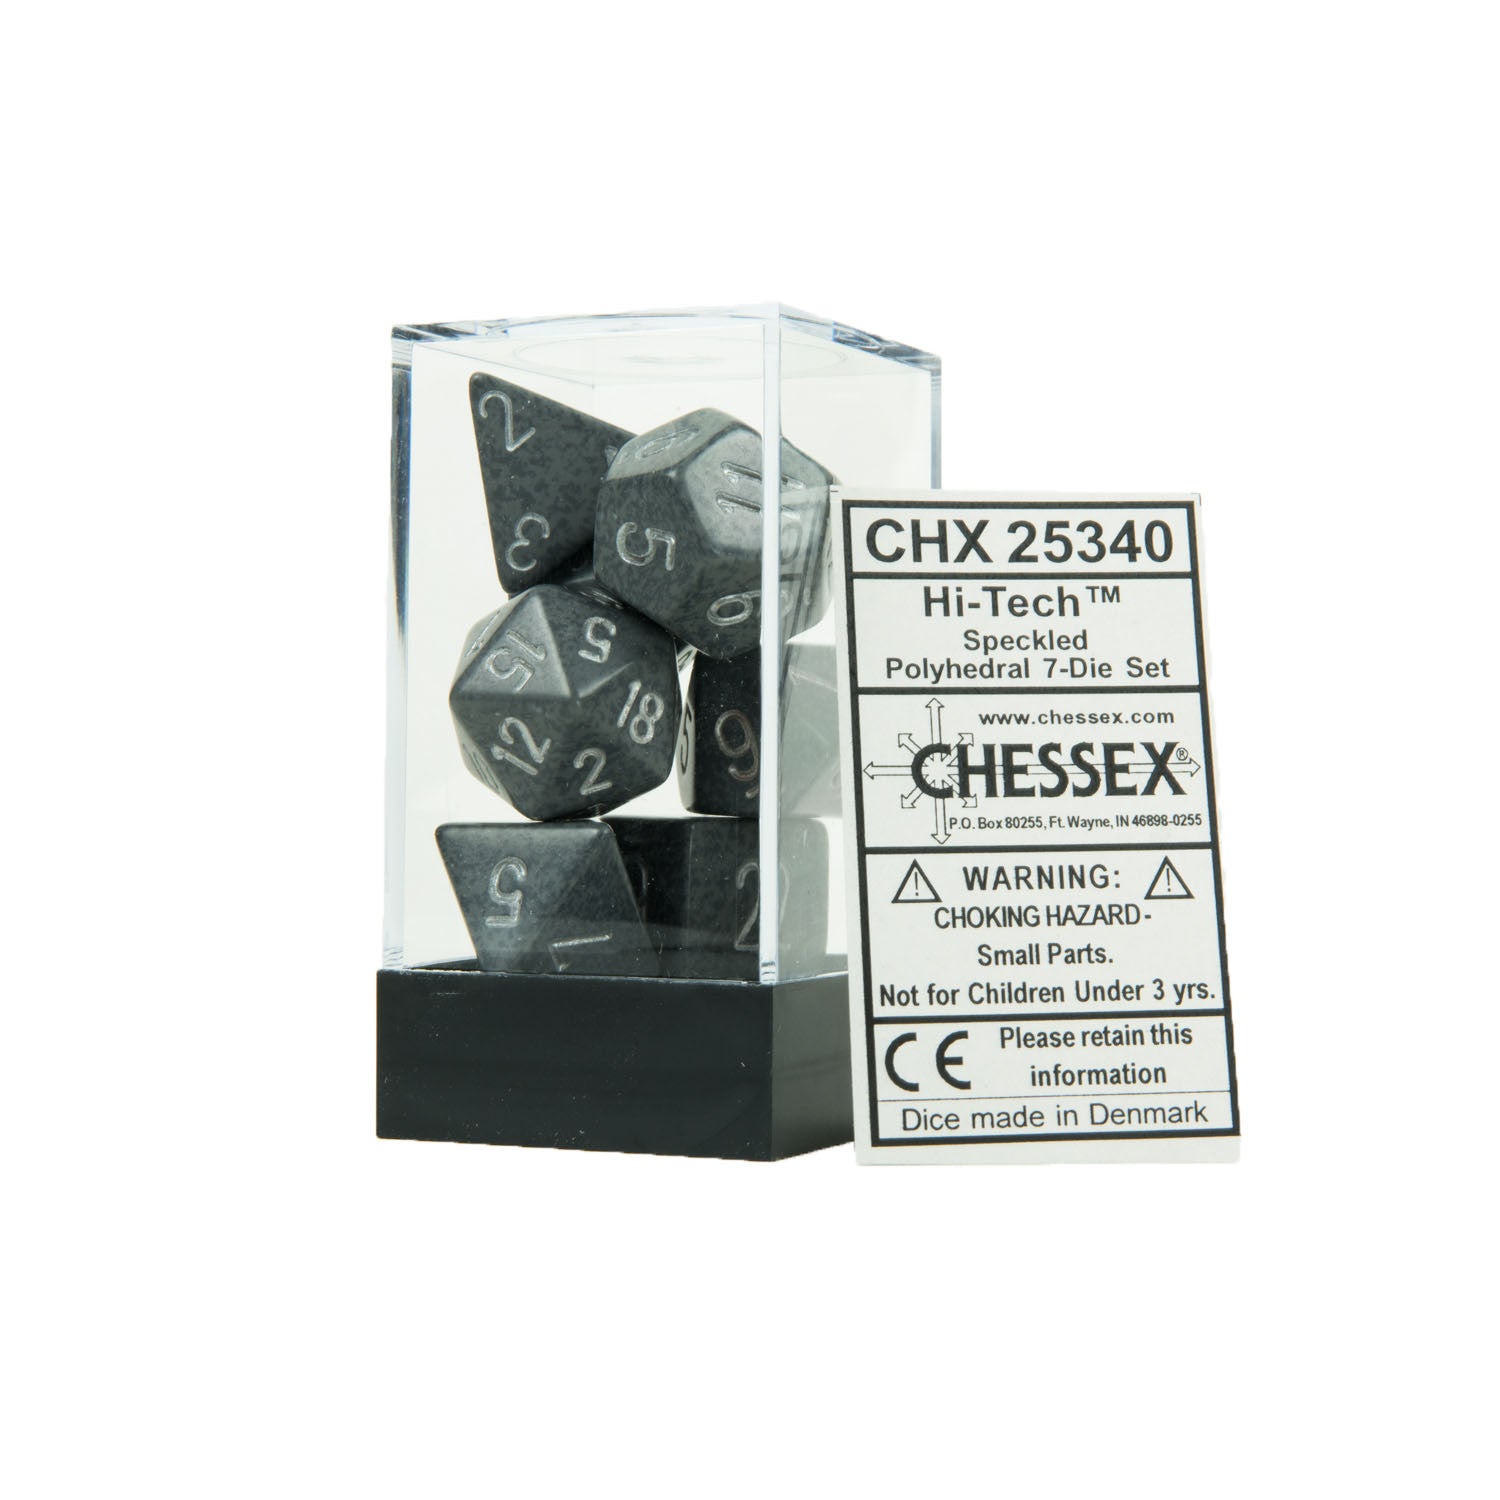 Chessex CHX25340 Hi-Tech™ Speckled Polyhedral Dice Set